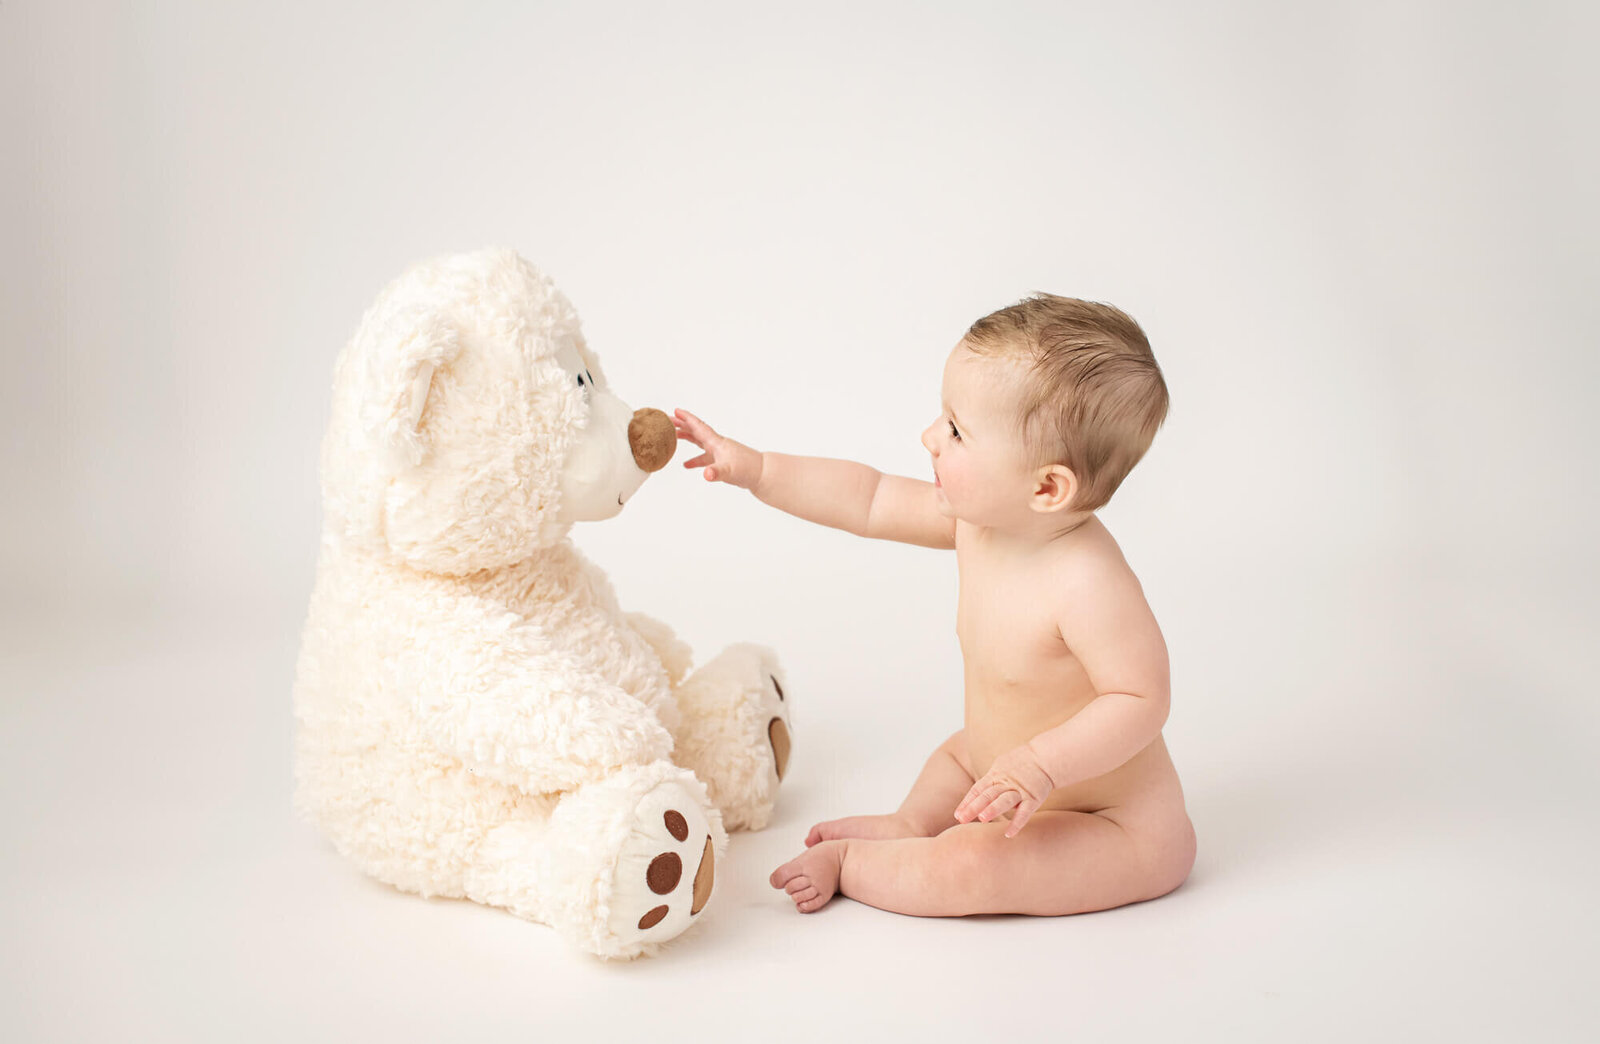 Baby interacting with large white teddy bear